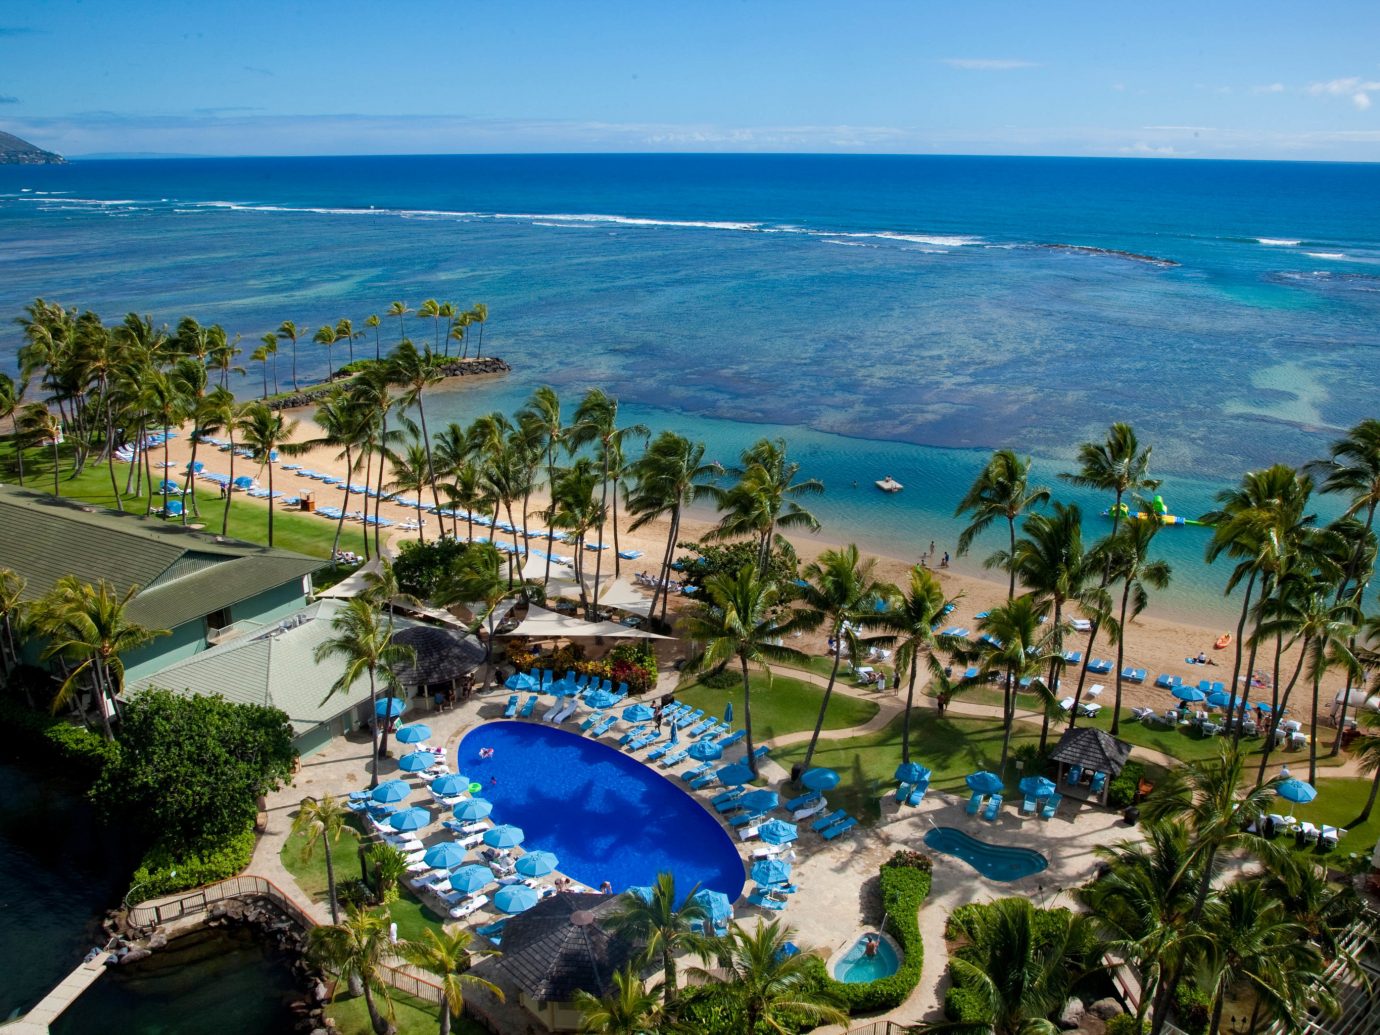 Boutique Hotels Hawaii Honolulu Hotels Resort resort town leisure swimming pool tourism tropics palm tree vacation caribbean Sea arecales water bay aerial photography real estate Lagoon sky estate Coast tree Ocean hotel